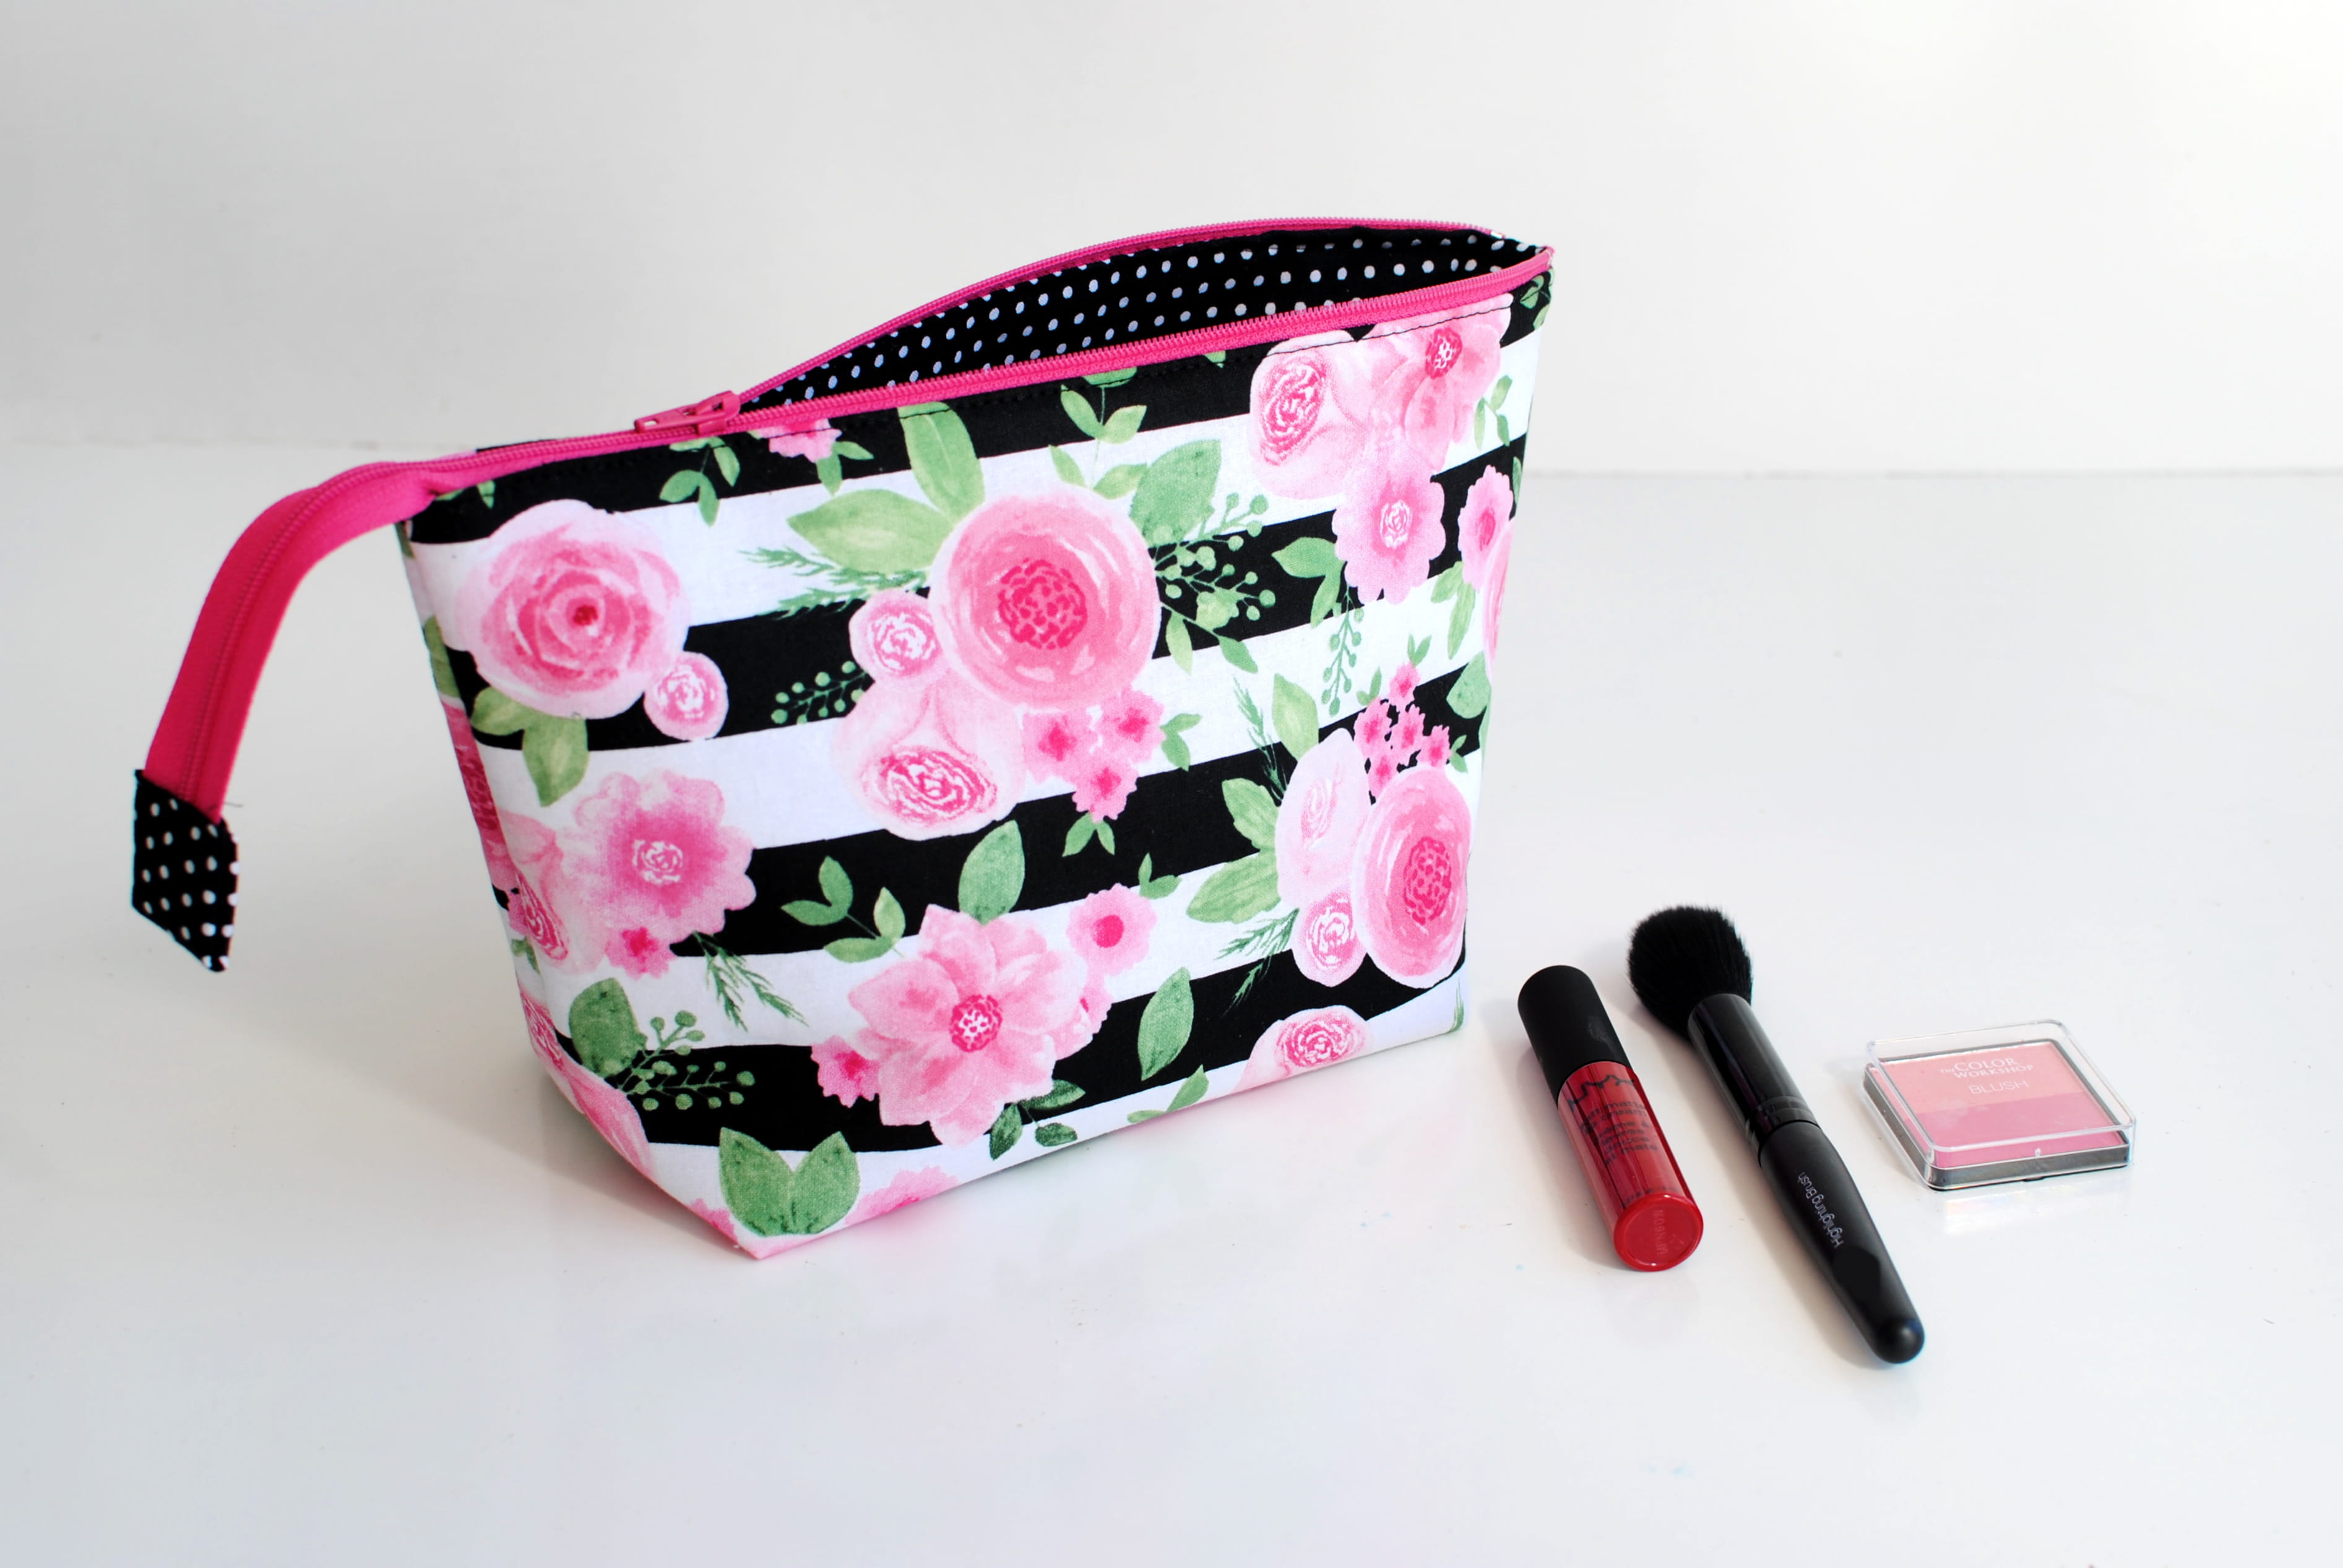 Benevolence LA - Toiletry Bag for Women Travel and Cosmetics - Small